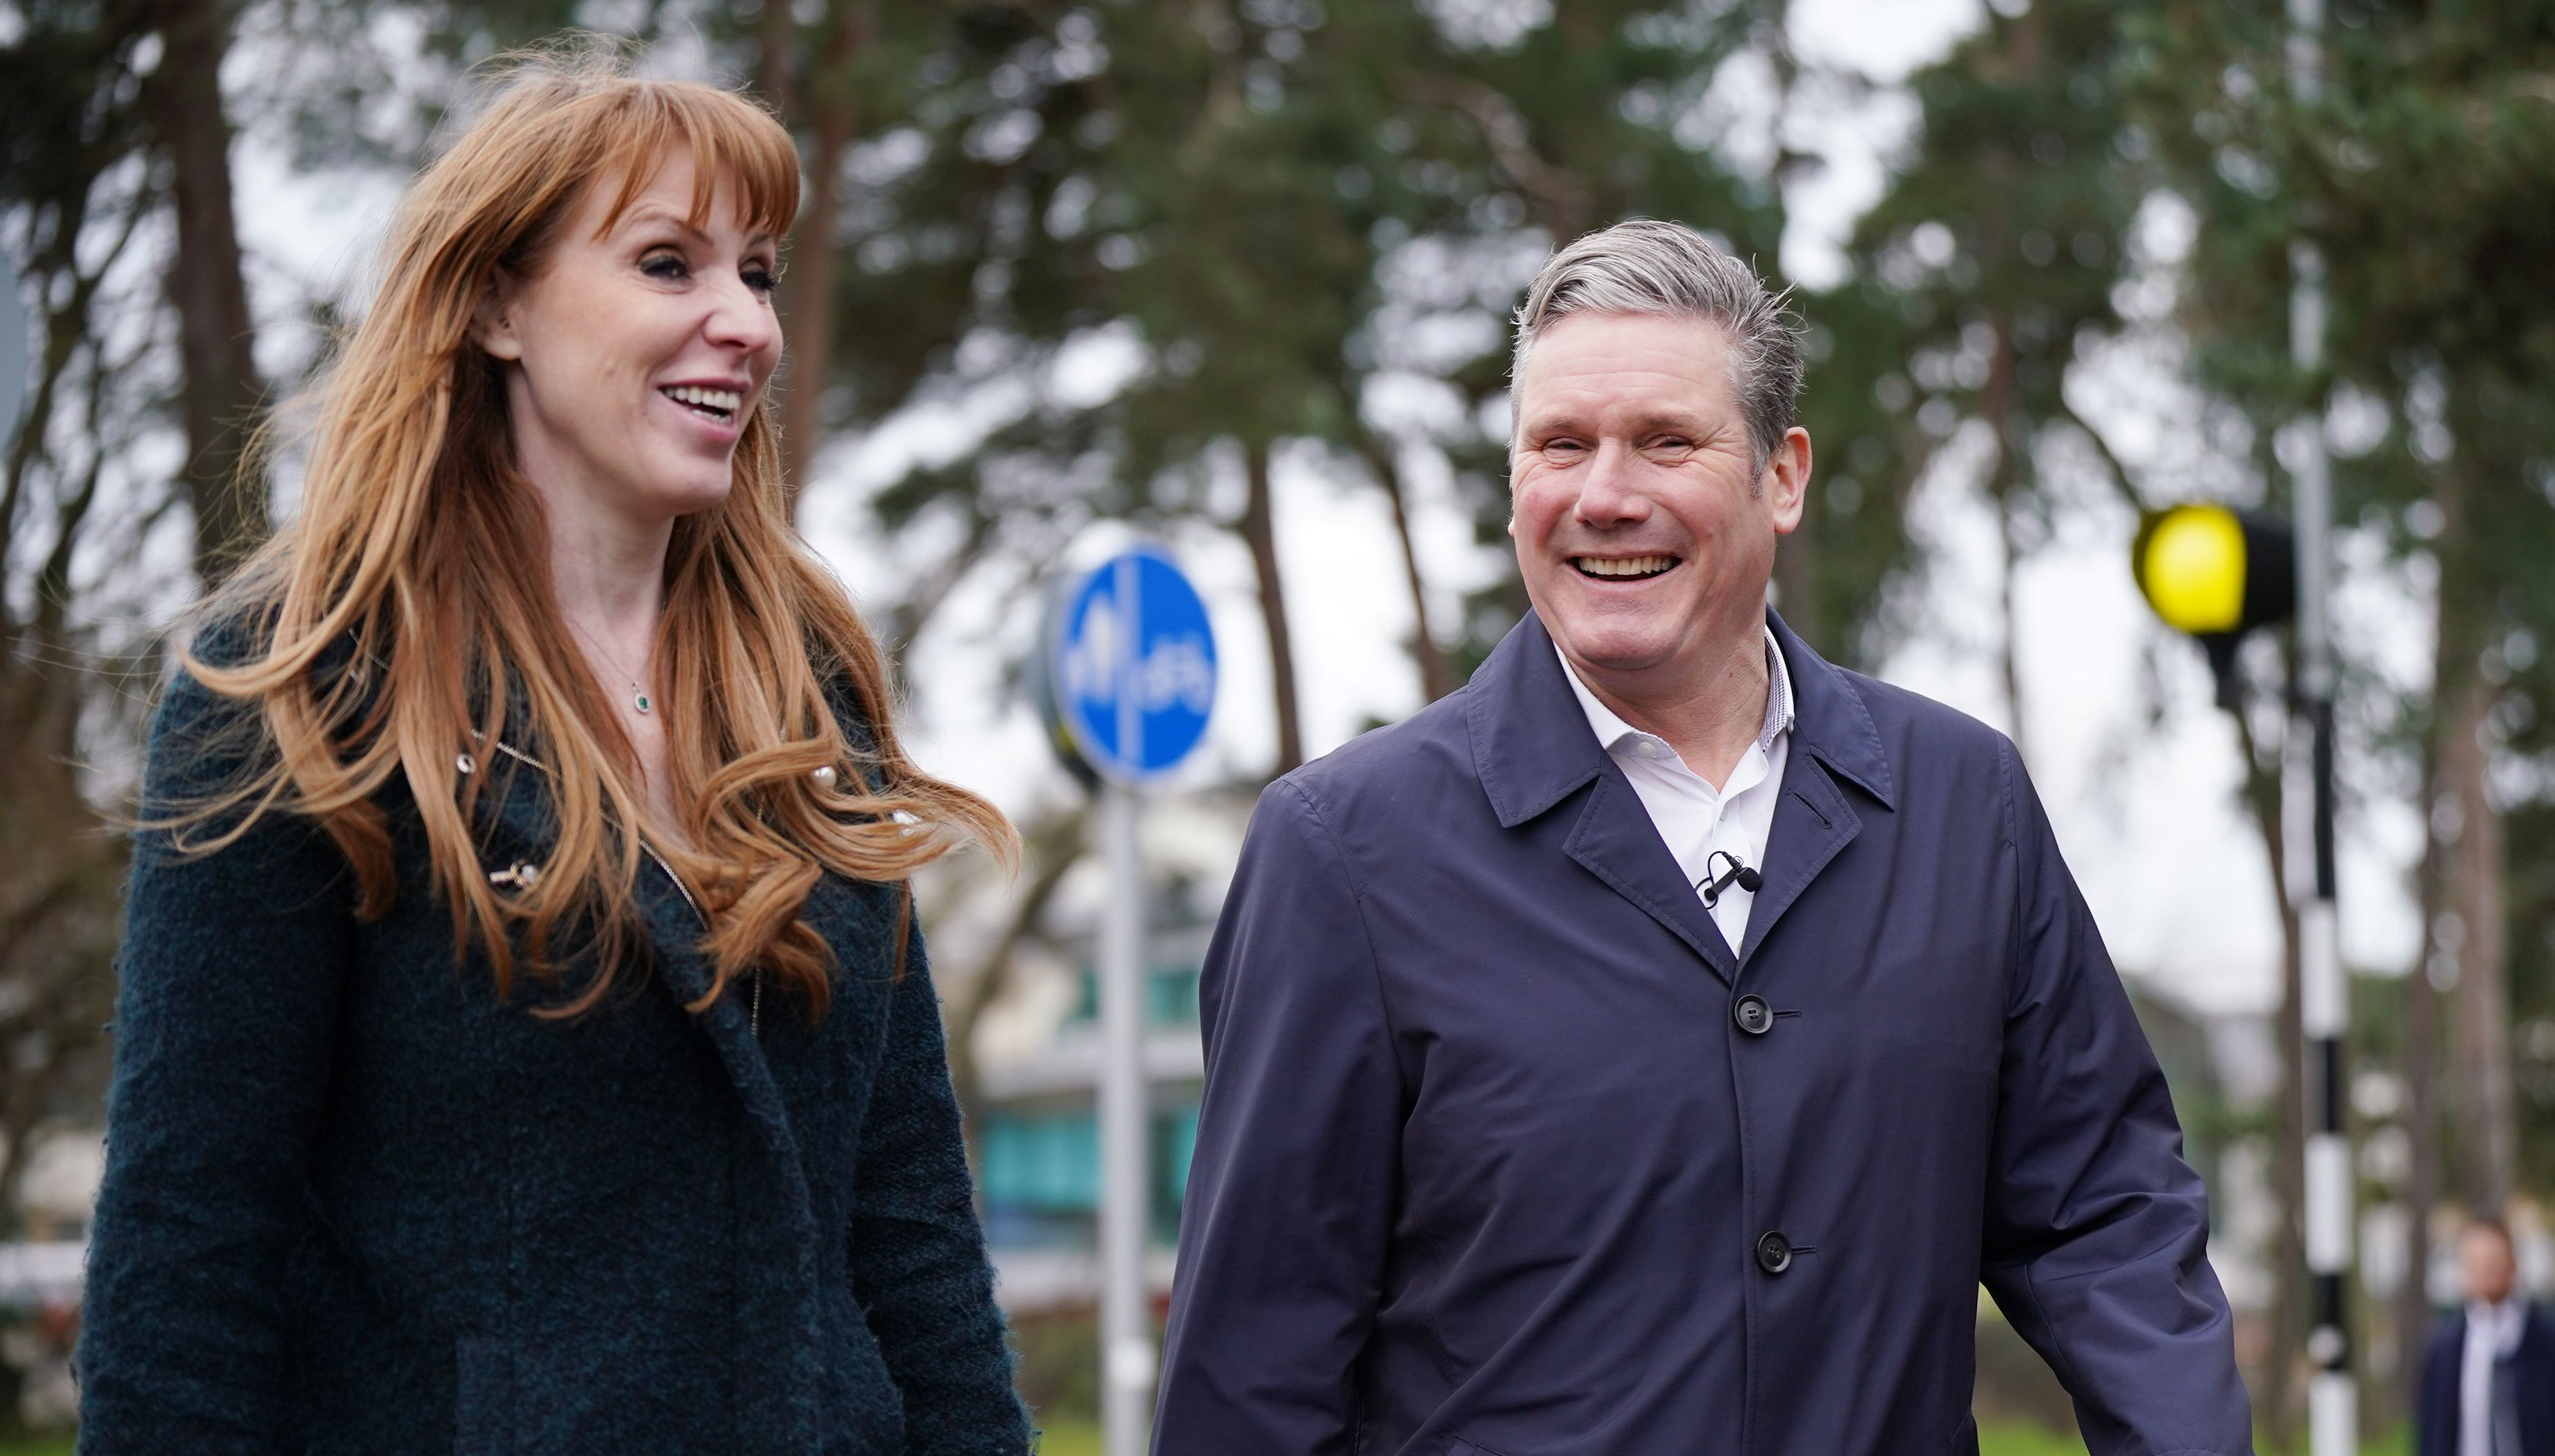 Labour Party leader Sir Keir Starmer and Deputy Leader of the Labour Party Angela Rayner during their visit to Harlow Ambulance Station in Essex, to meet staff and frontline workers. Picture date: Friday January 27, 2023.